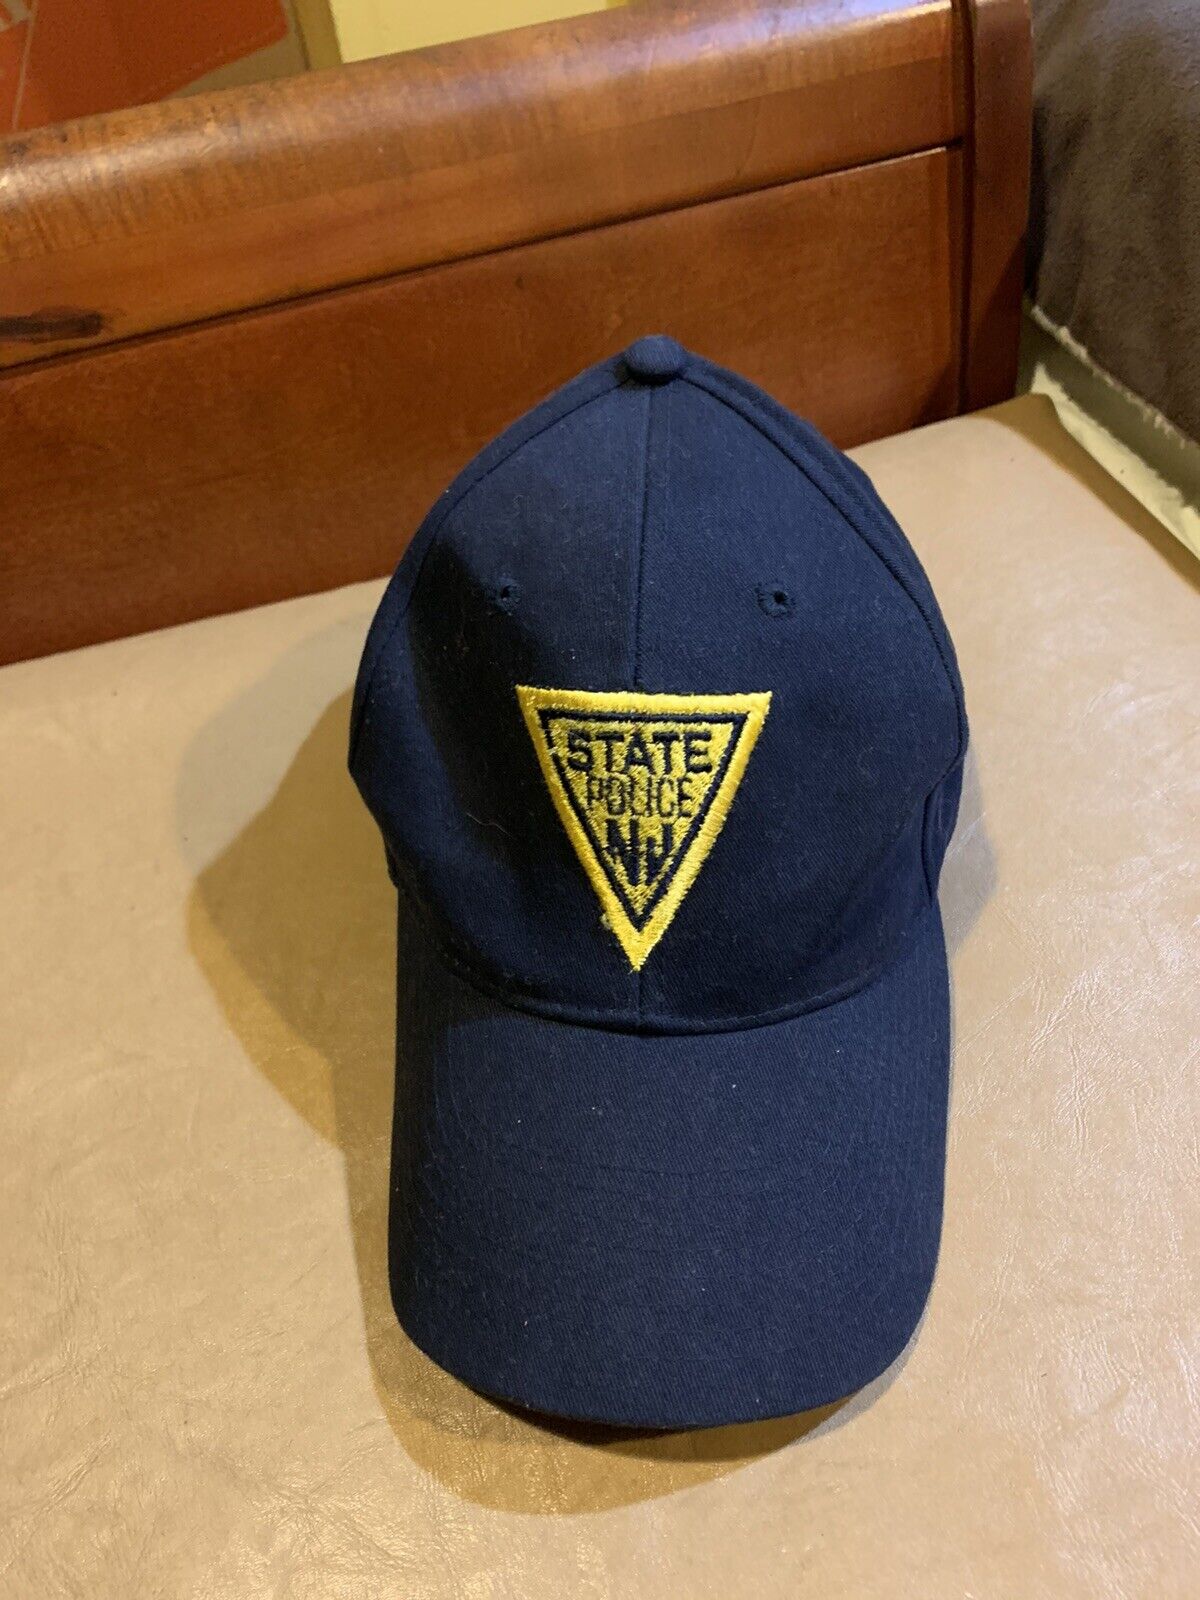 NJSP - New Jersey State Police Cap Hat Hook And Loop Closure